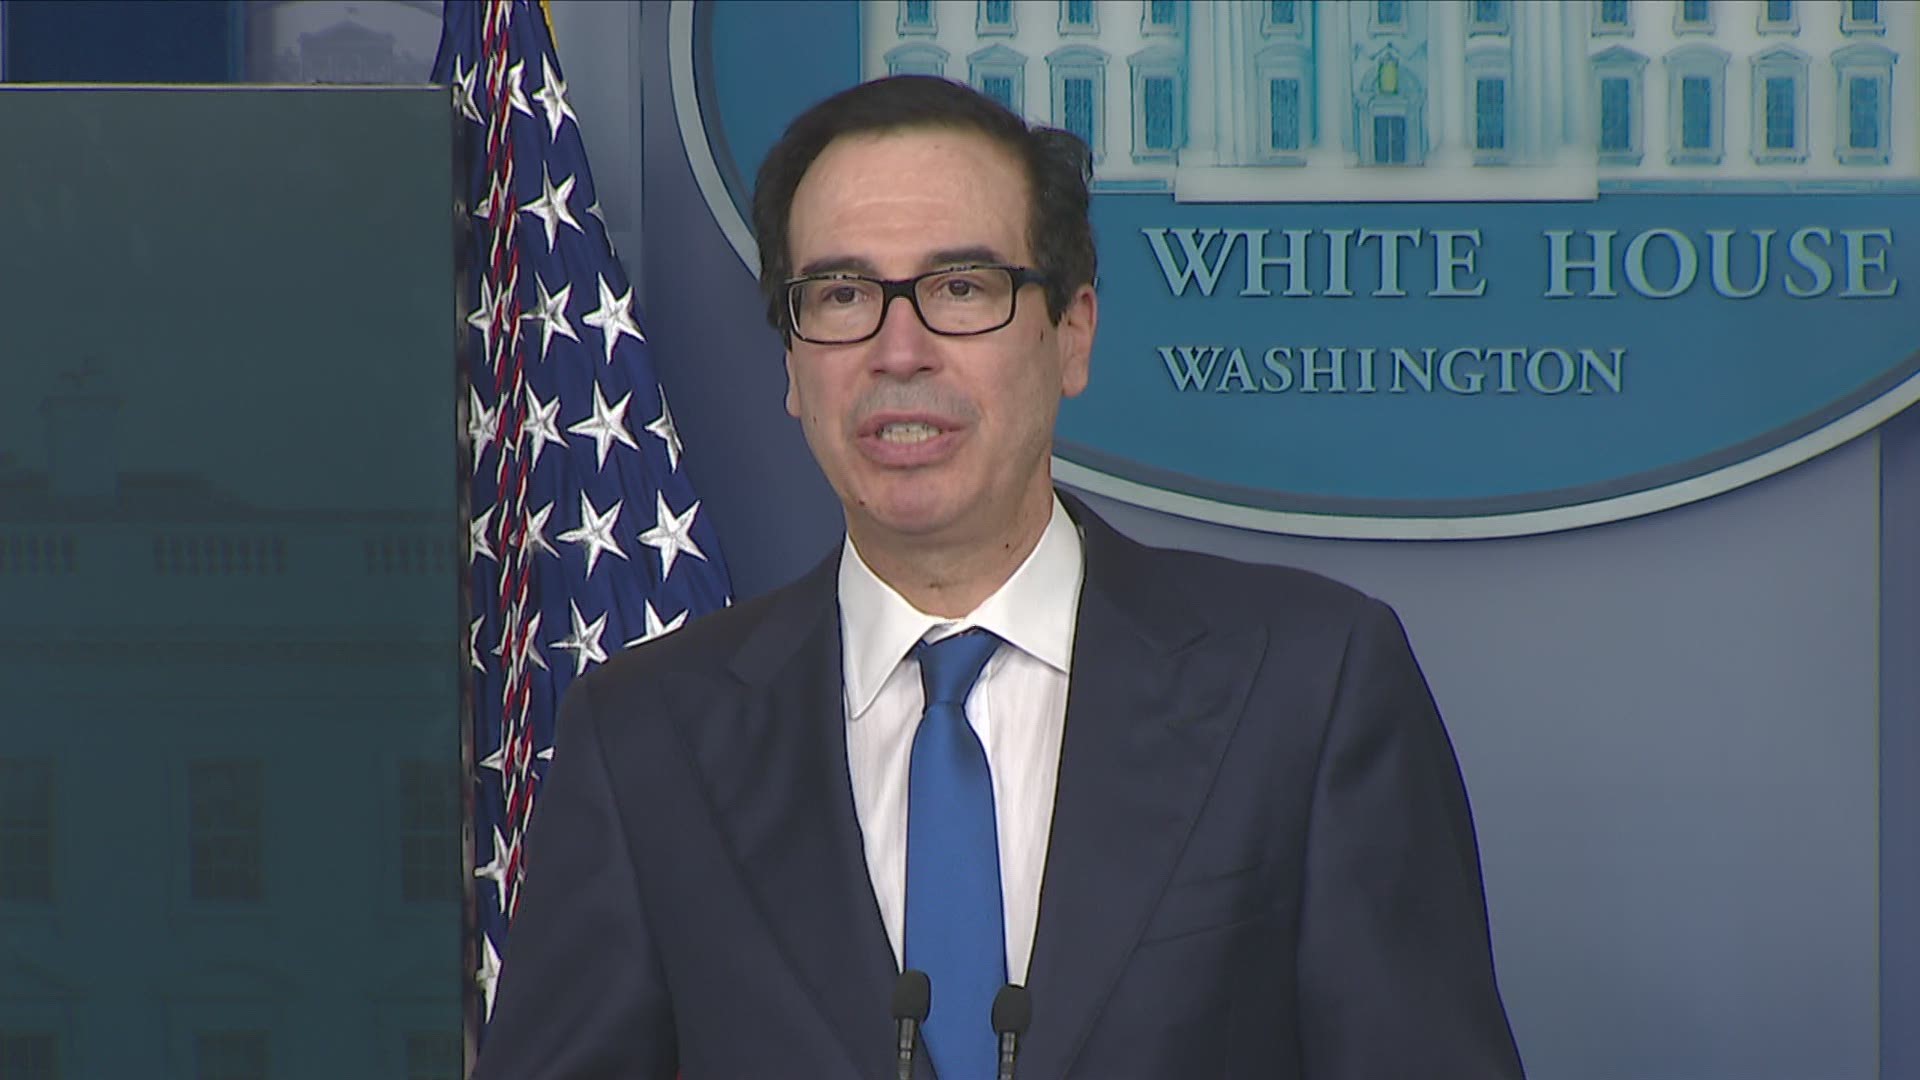 Treasury Secretary Steven Mnuchin explained Monday that officials expect more than 80 million Americans to receive their stimulus checks by Wednesday.